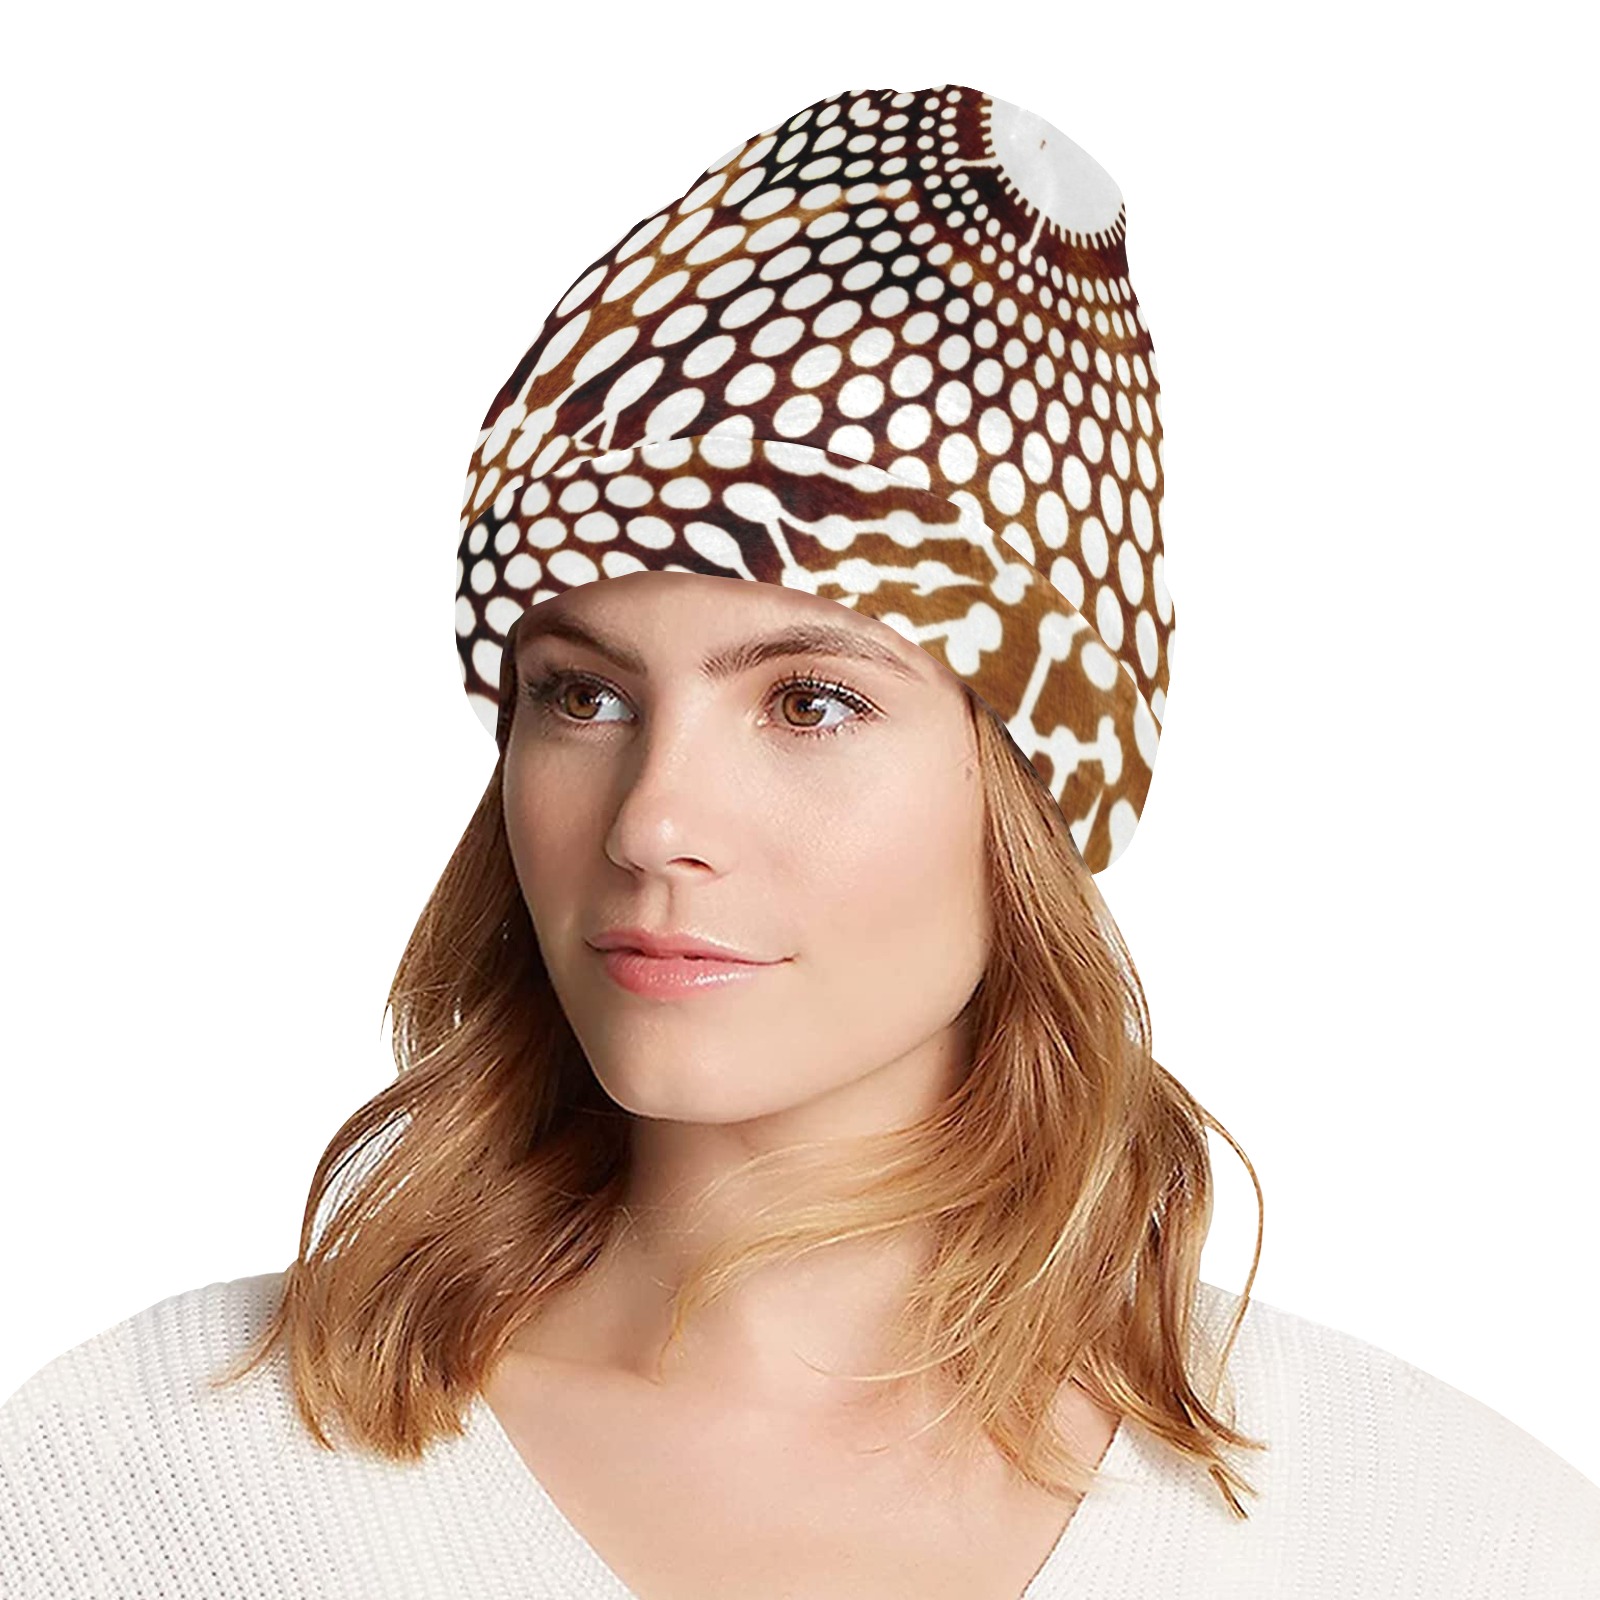 AFRICAN PRINT PATTERN 4 All Over Print Beanie for Adults